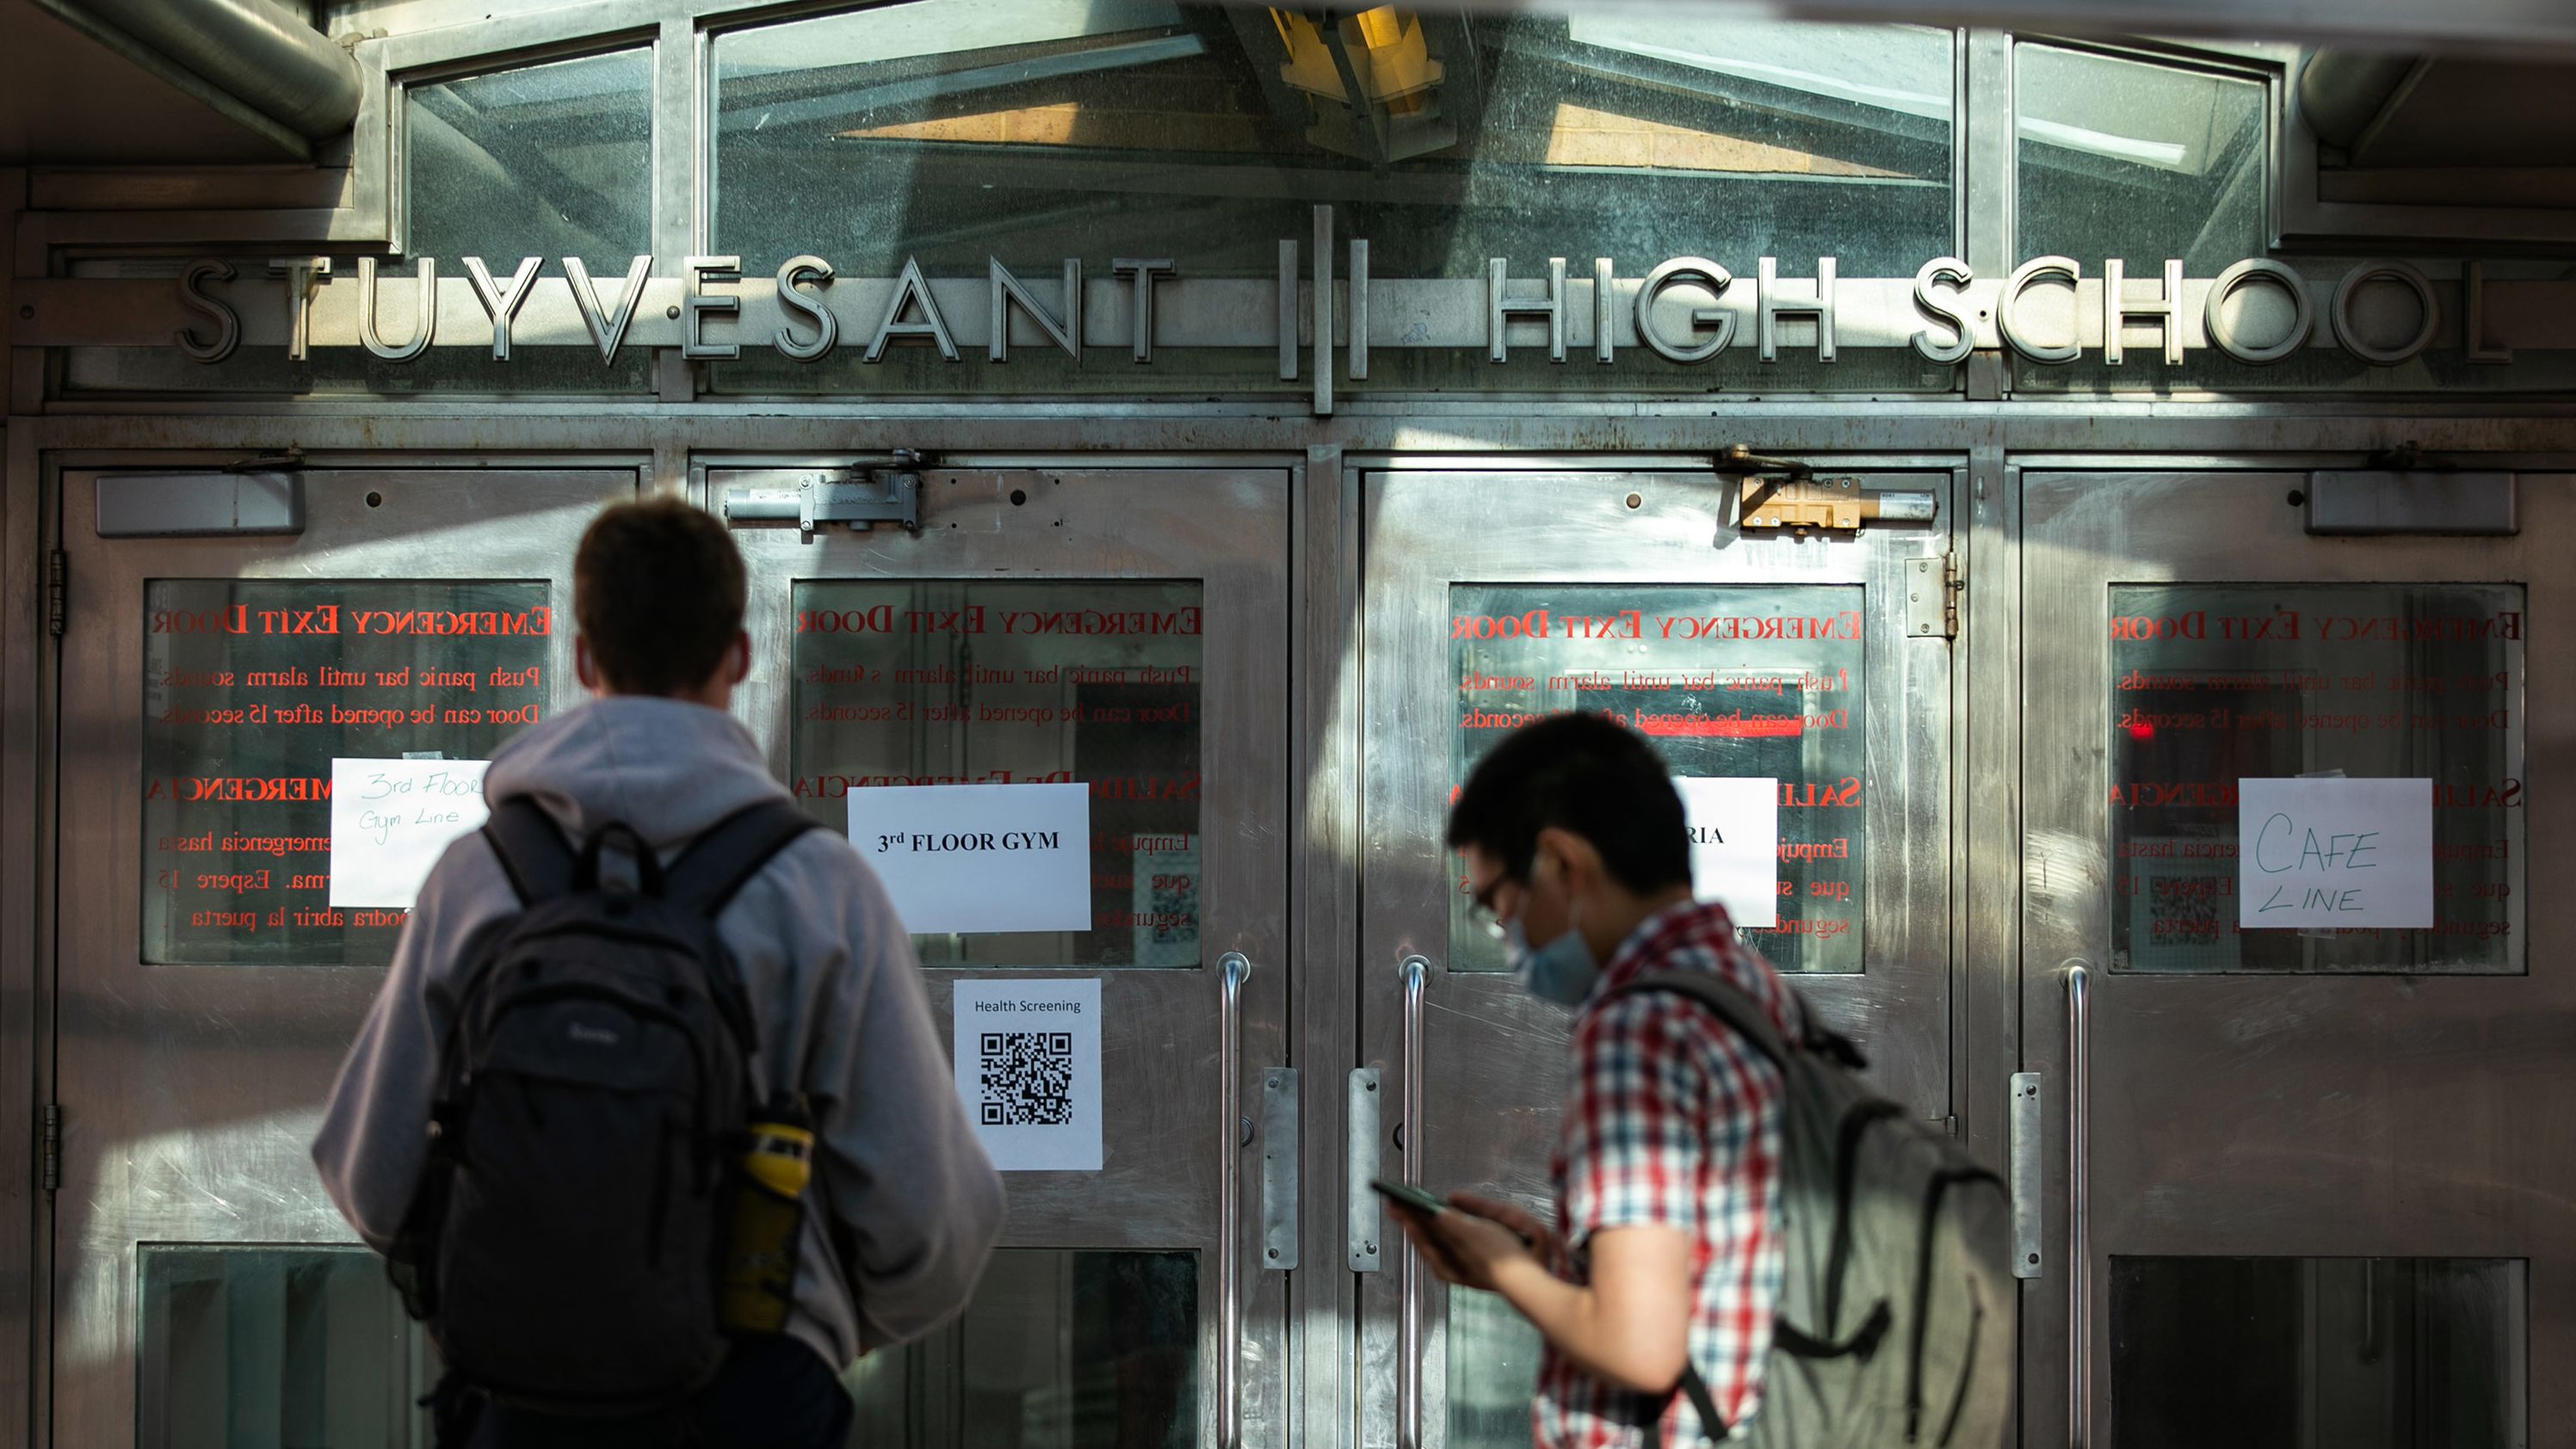 Students arrive at Stuyvesant High School in New York City in October.